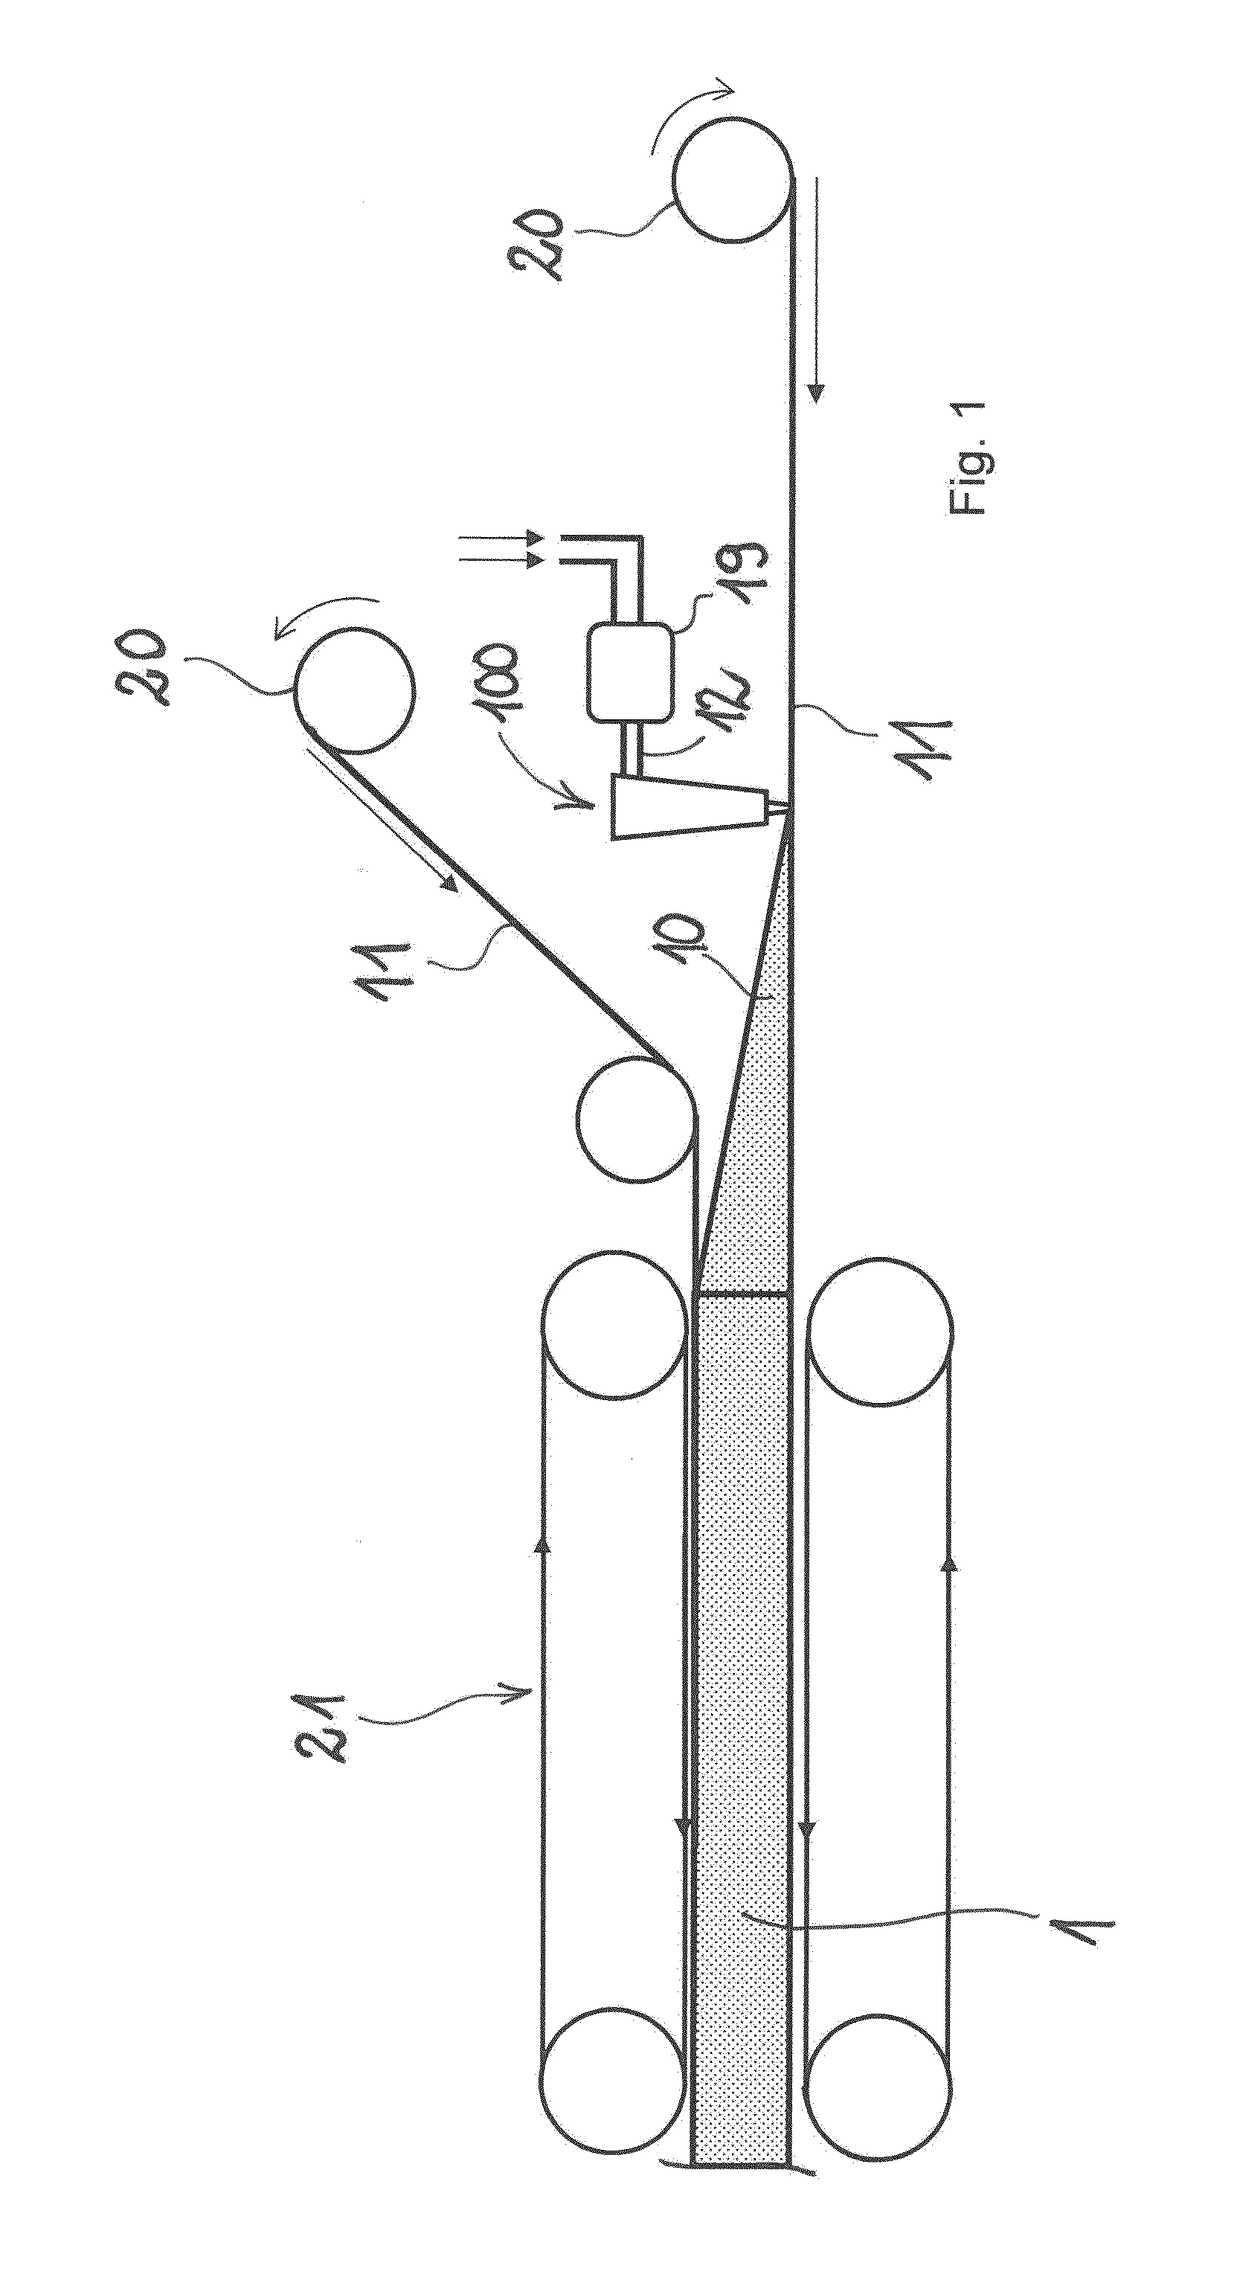 Casting device for applying a foaming reaction mixture